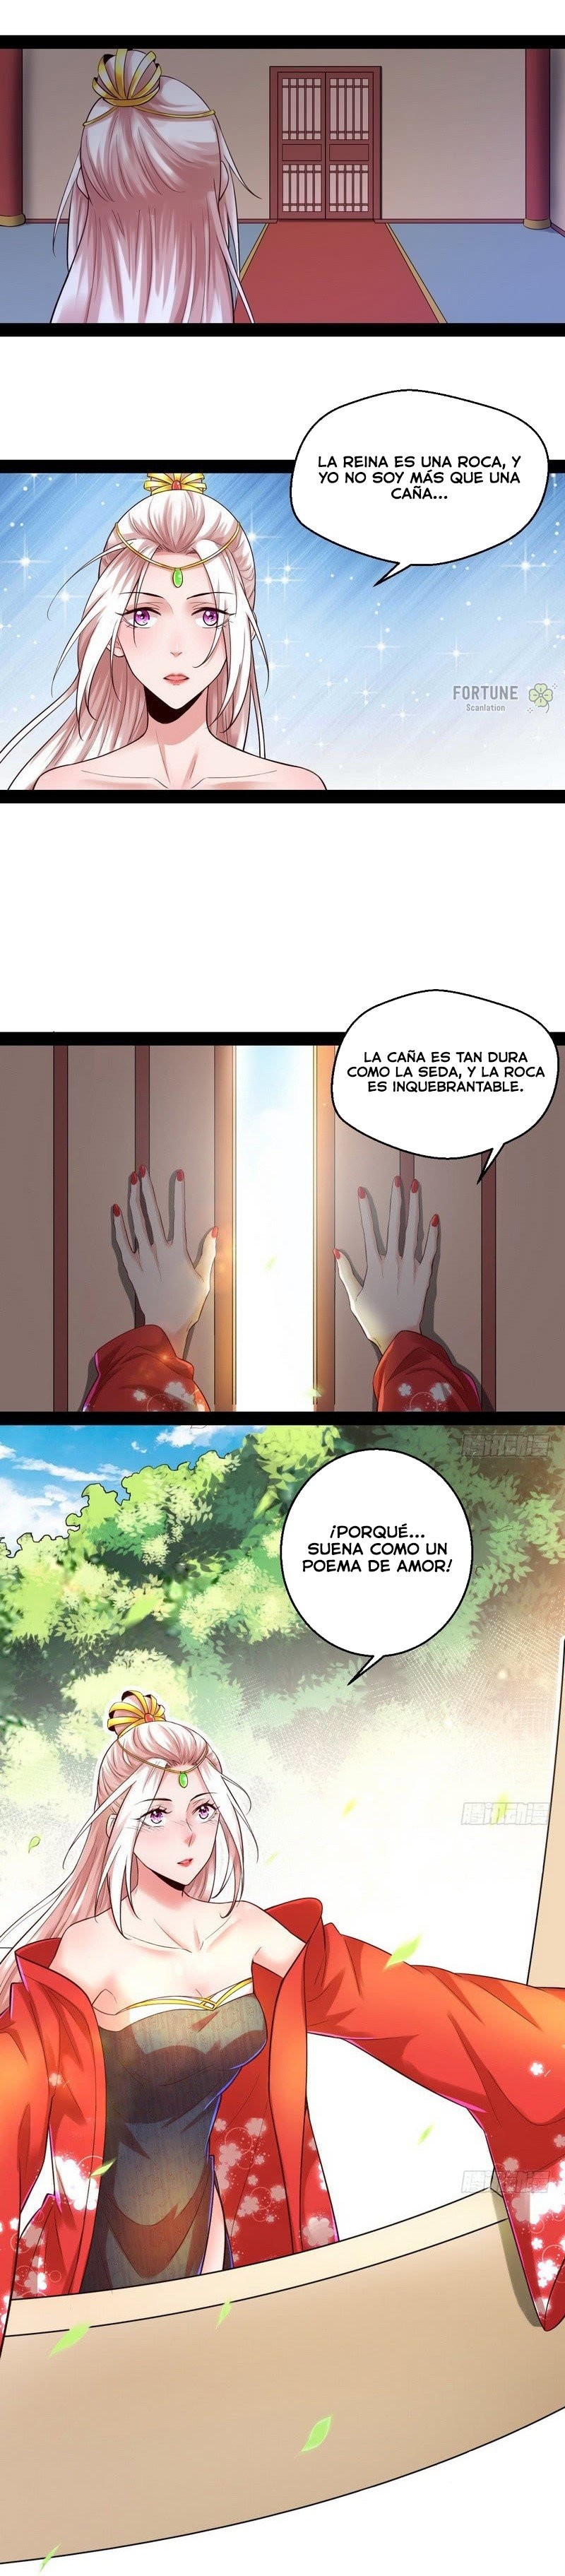 Manga Soy un dios maligno Chapter 13 image number 2